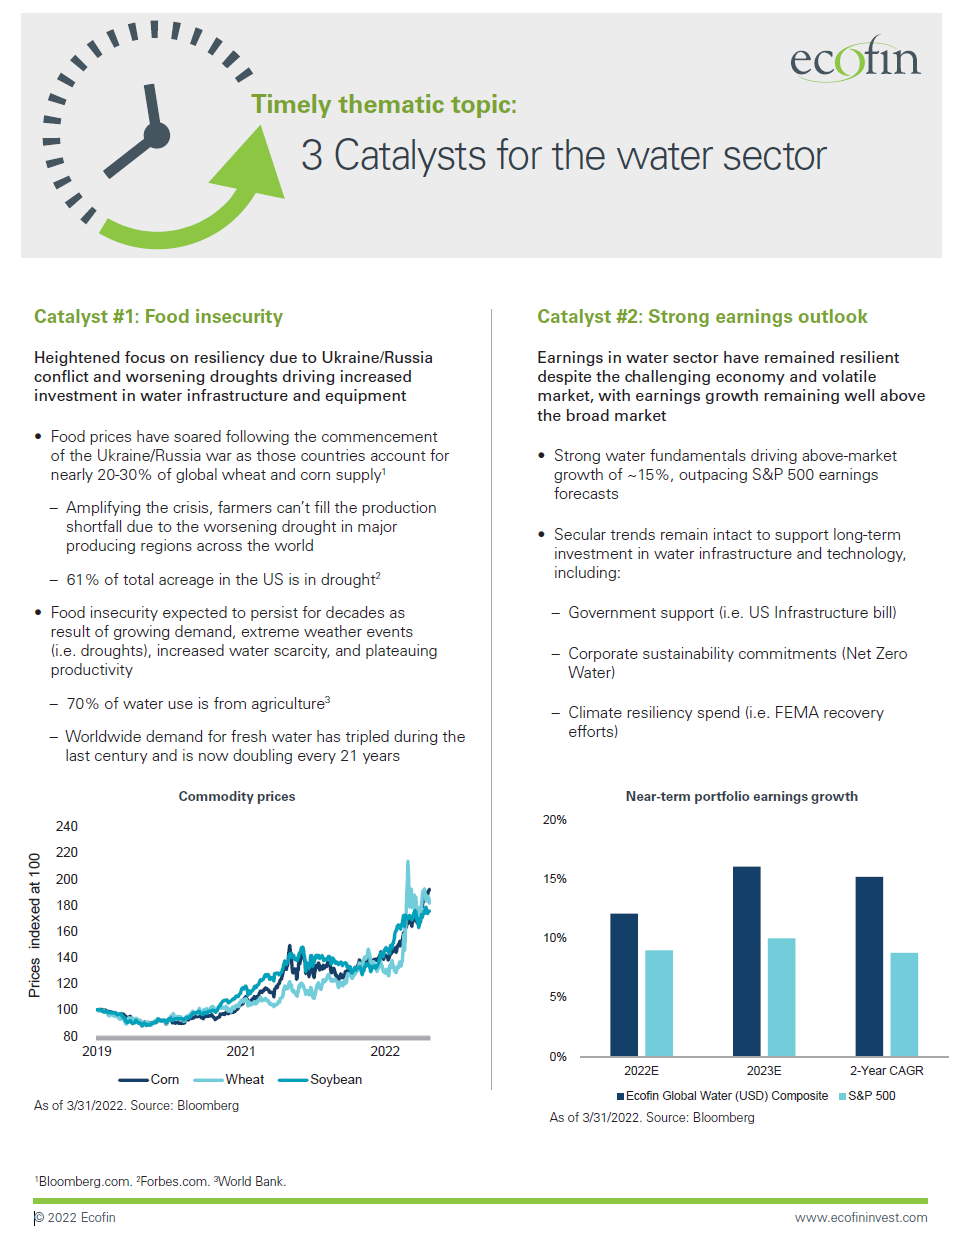  Timely thematic topic: 3 Catalysts for the water sector